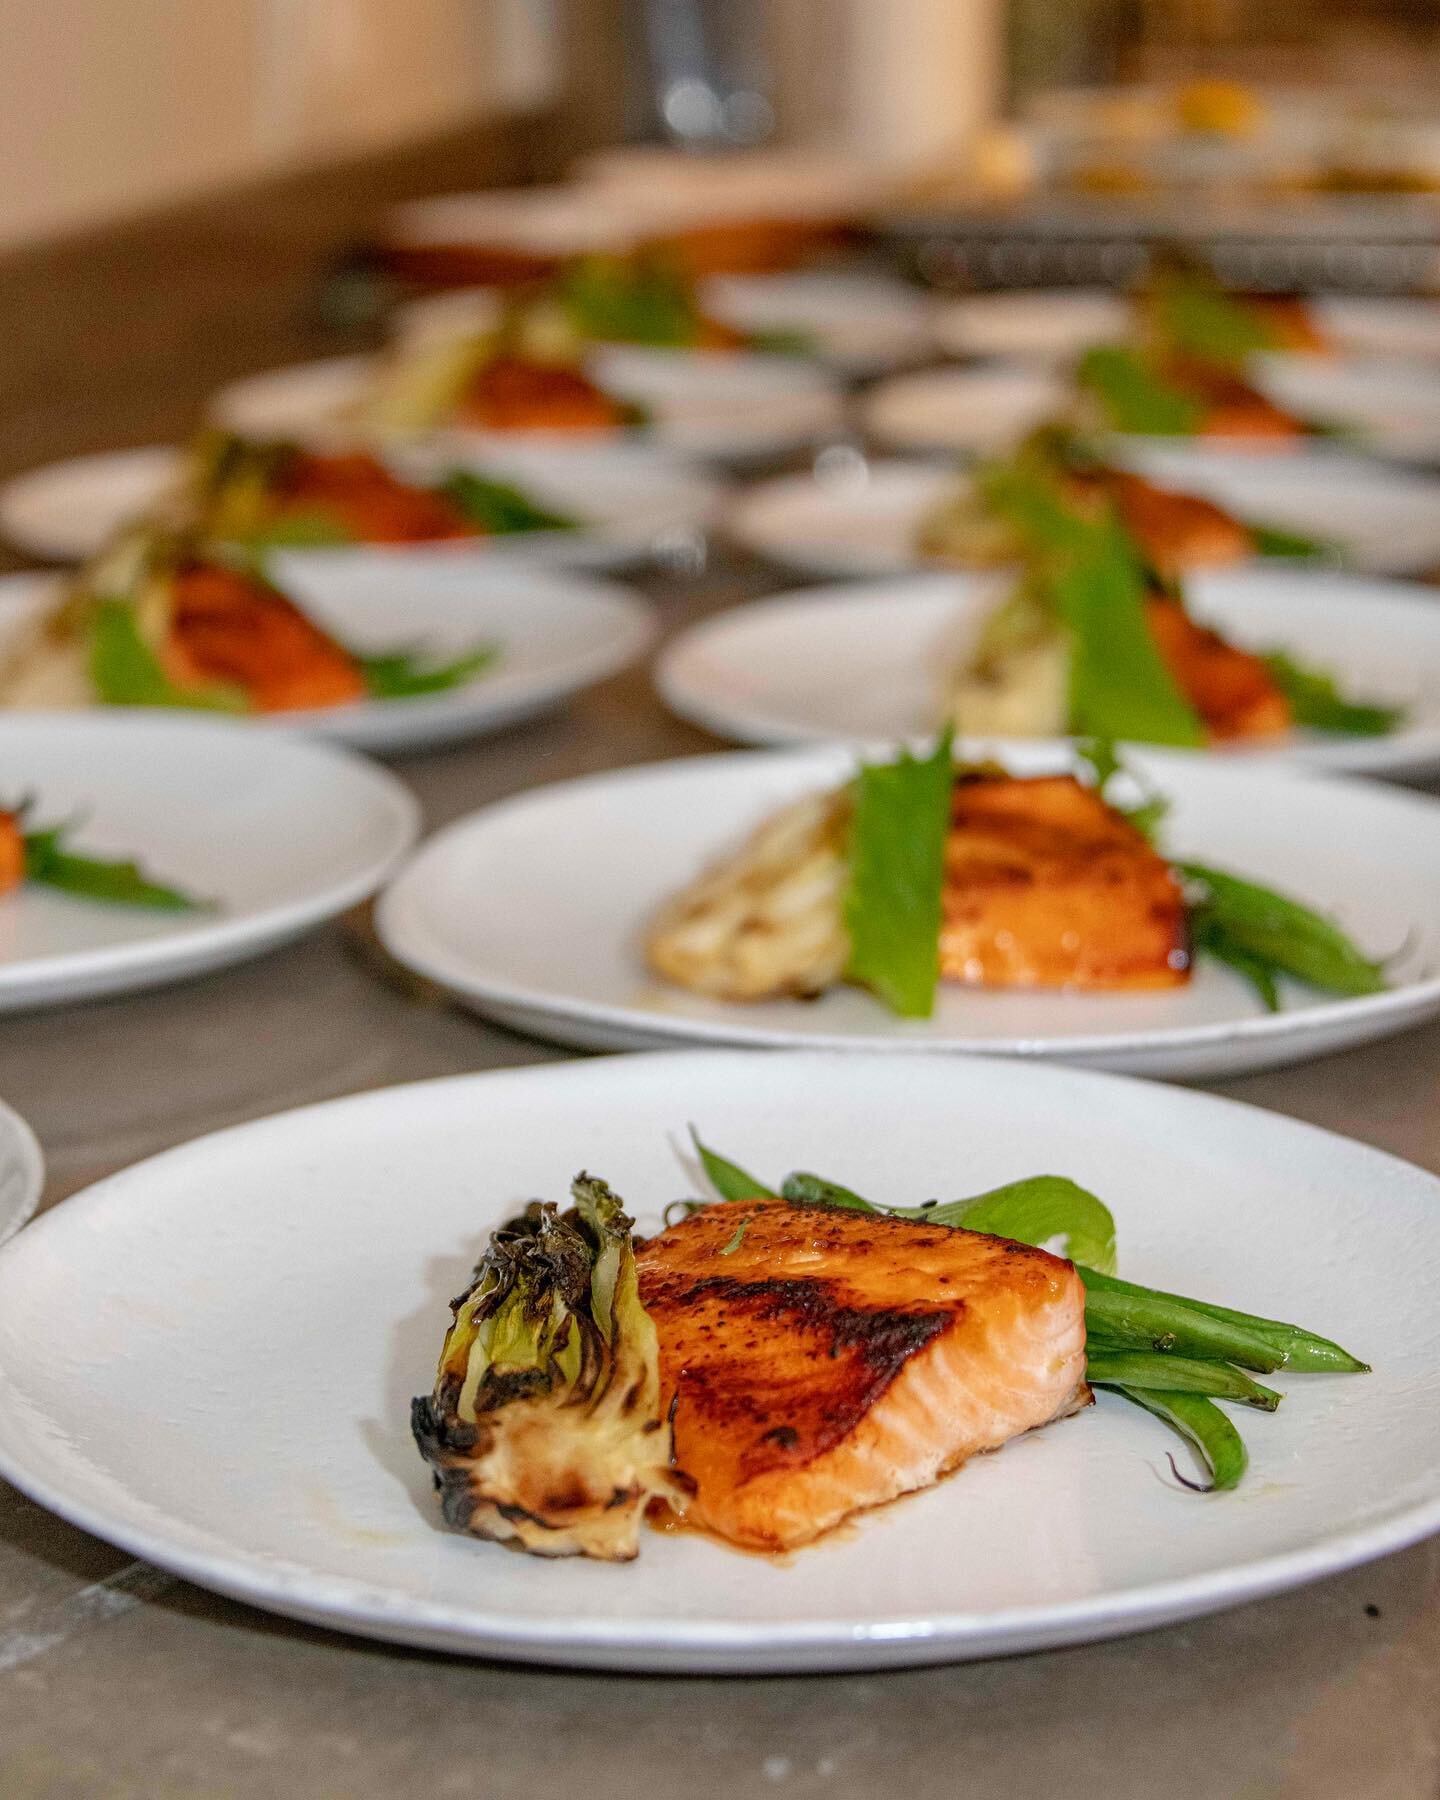 Miso glazed salmon with charred haricot verts, soy braised bok choy, and shiso for client dinner party.

📸: @aldisjoi 

#miso #salmon #eeeeeats #cheflife #chef #chefsofinstagram #privatecheffing #privatecheflife #privatechef #gaychef #food #eat #din